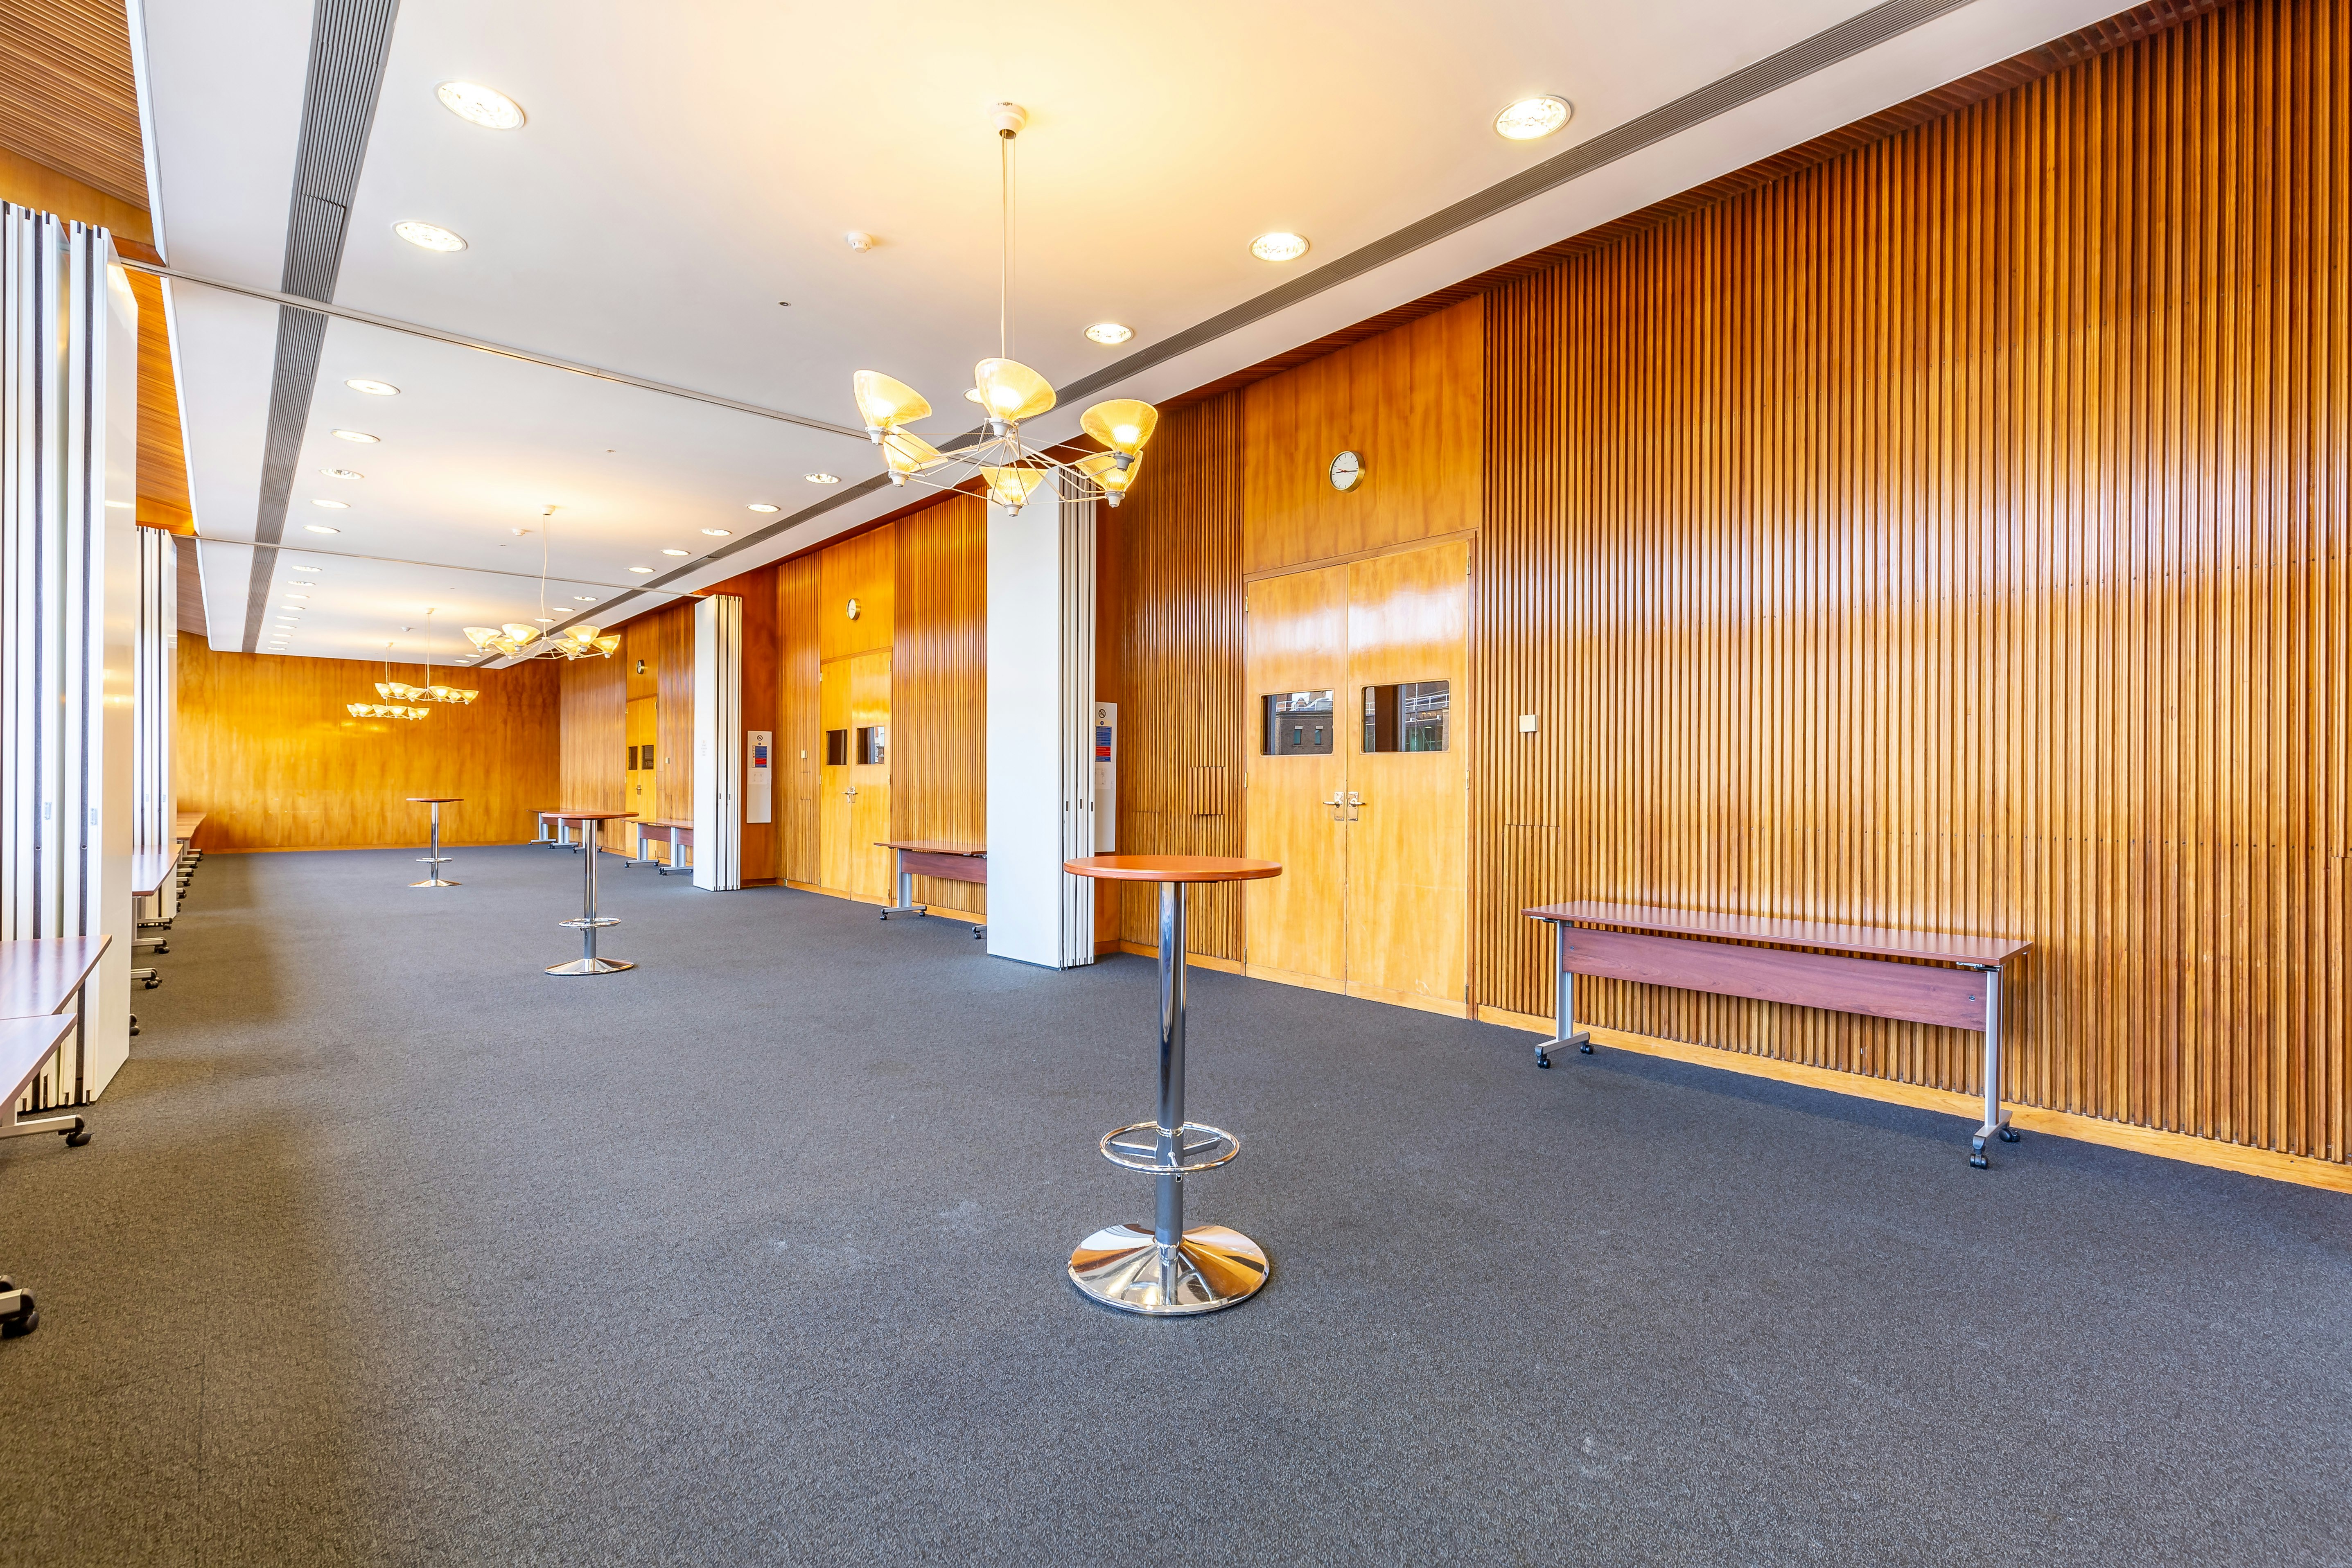 Meeting Rooms Venues in West London - Congress Centre